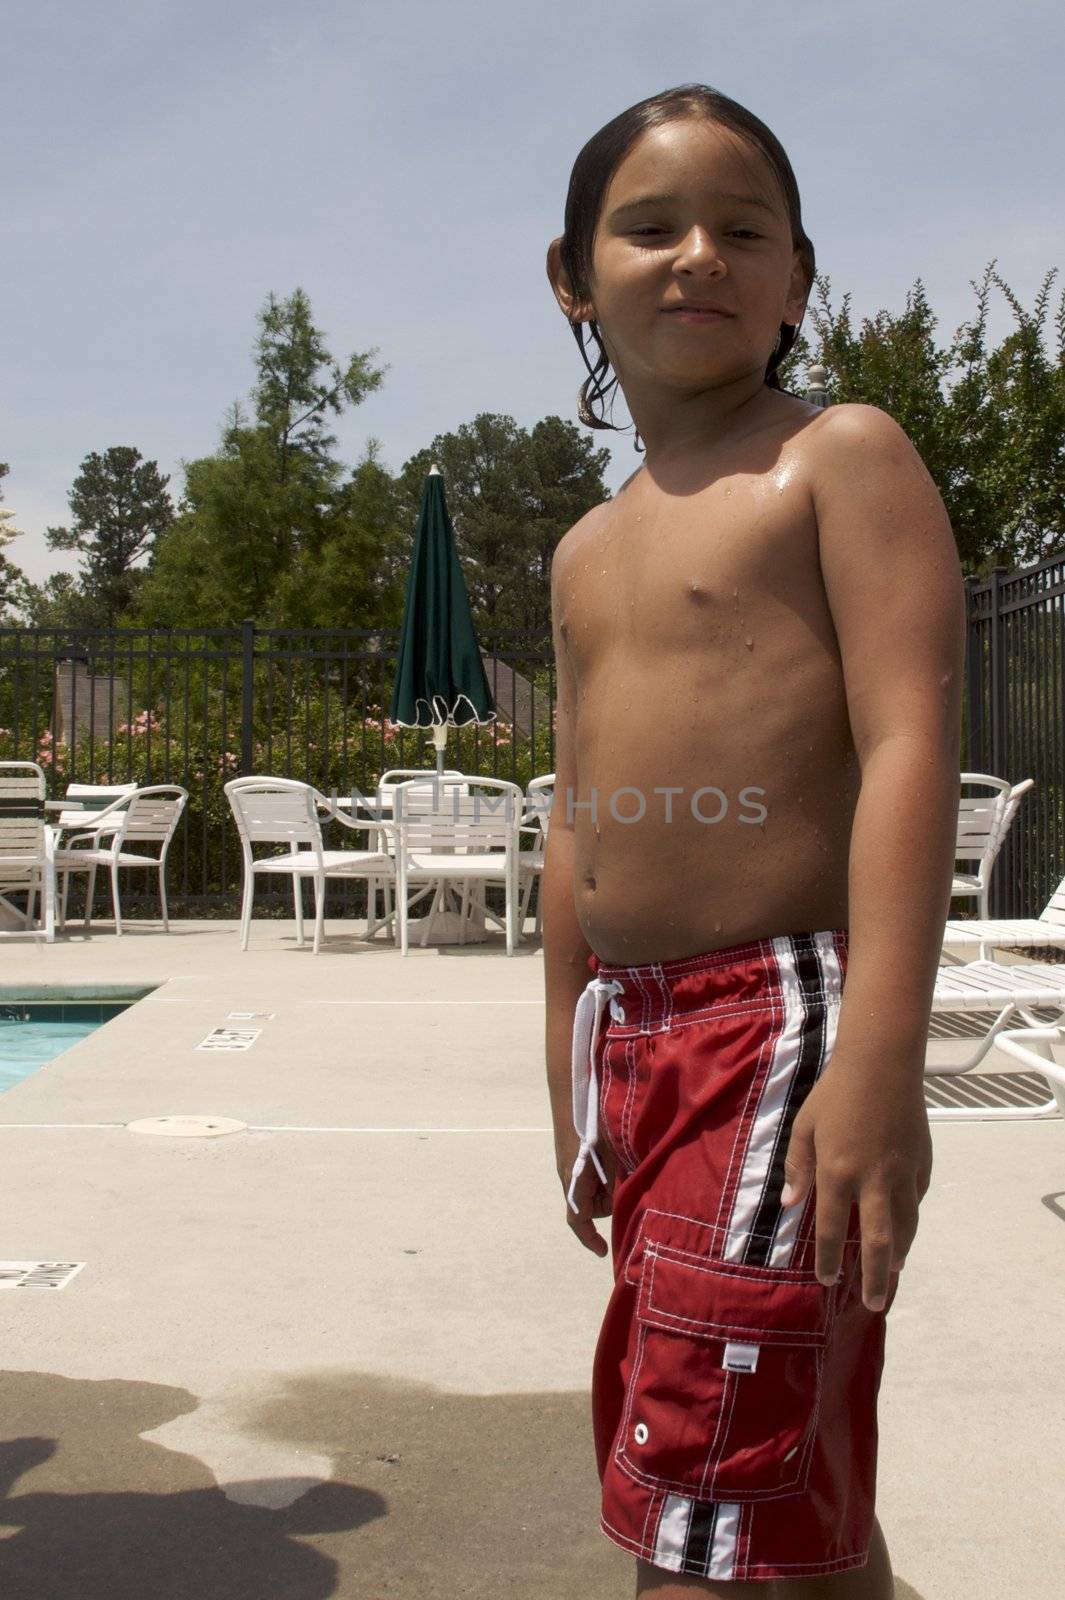 Little boy playing at pool